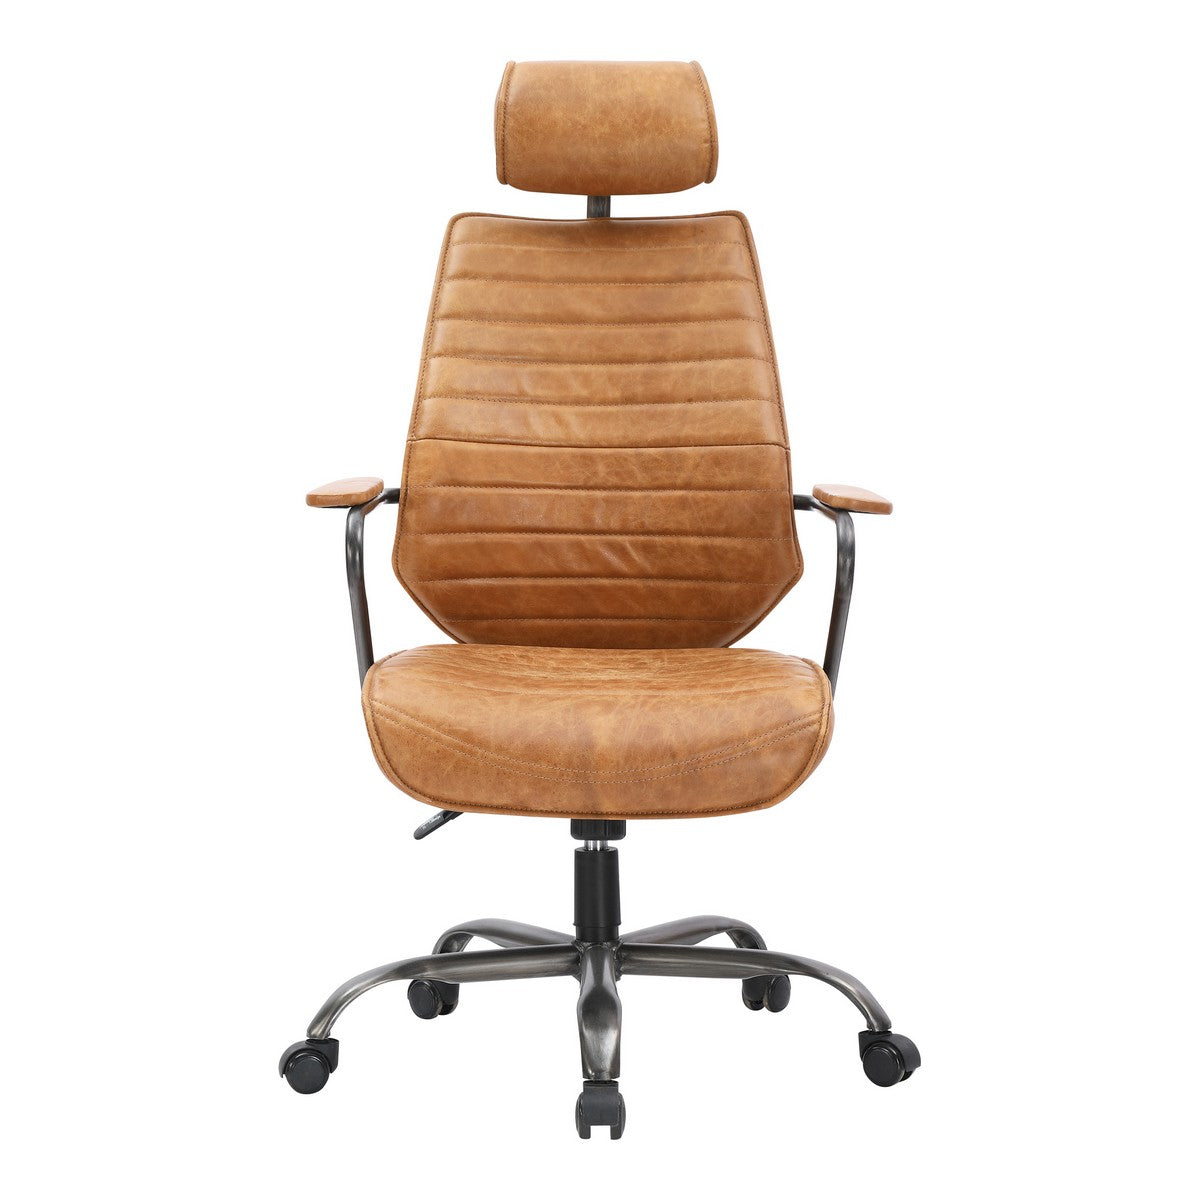 Moe's Home Collection Executive Swivel office Chair Cognac - PK-1081-23 - Moe's Home Collection - Office Chairs - Minimal And Modern - 1